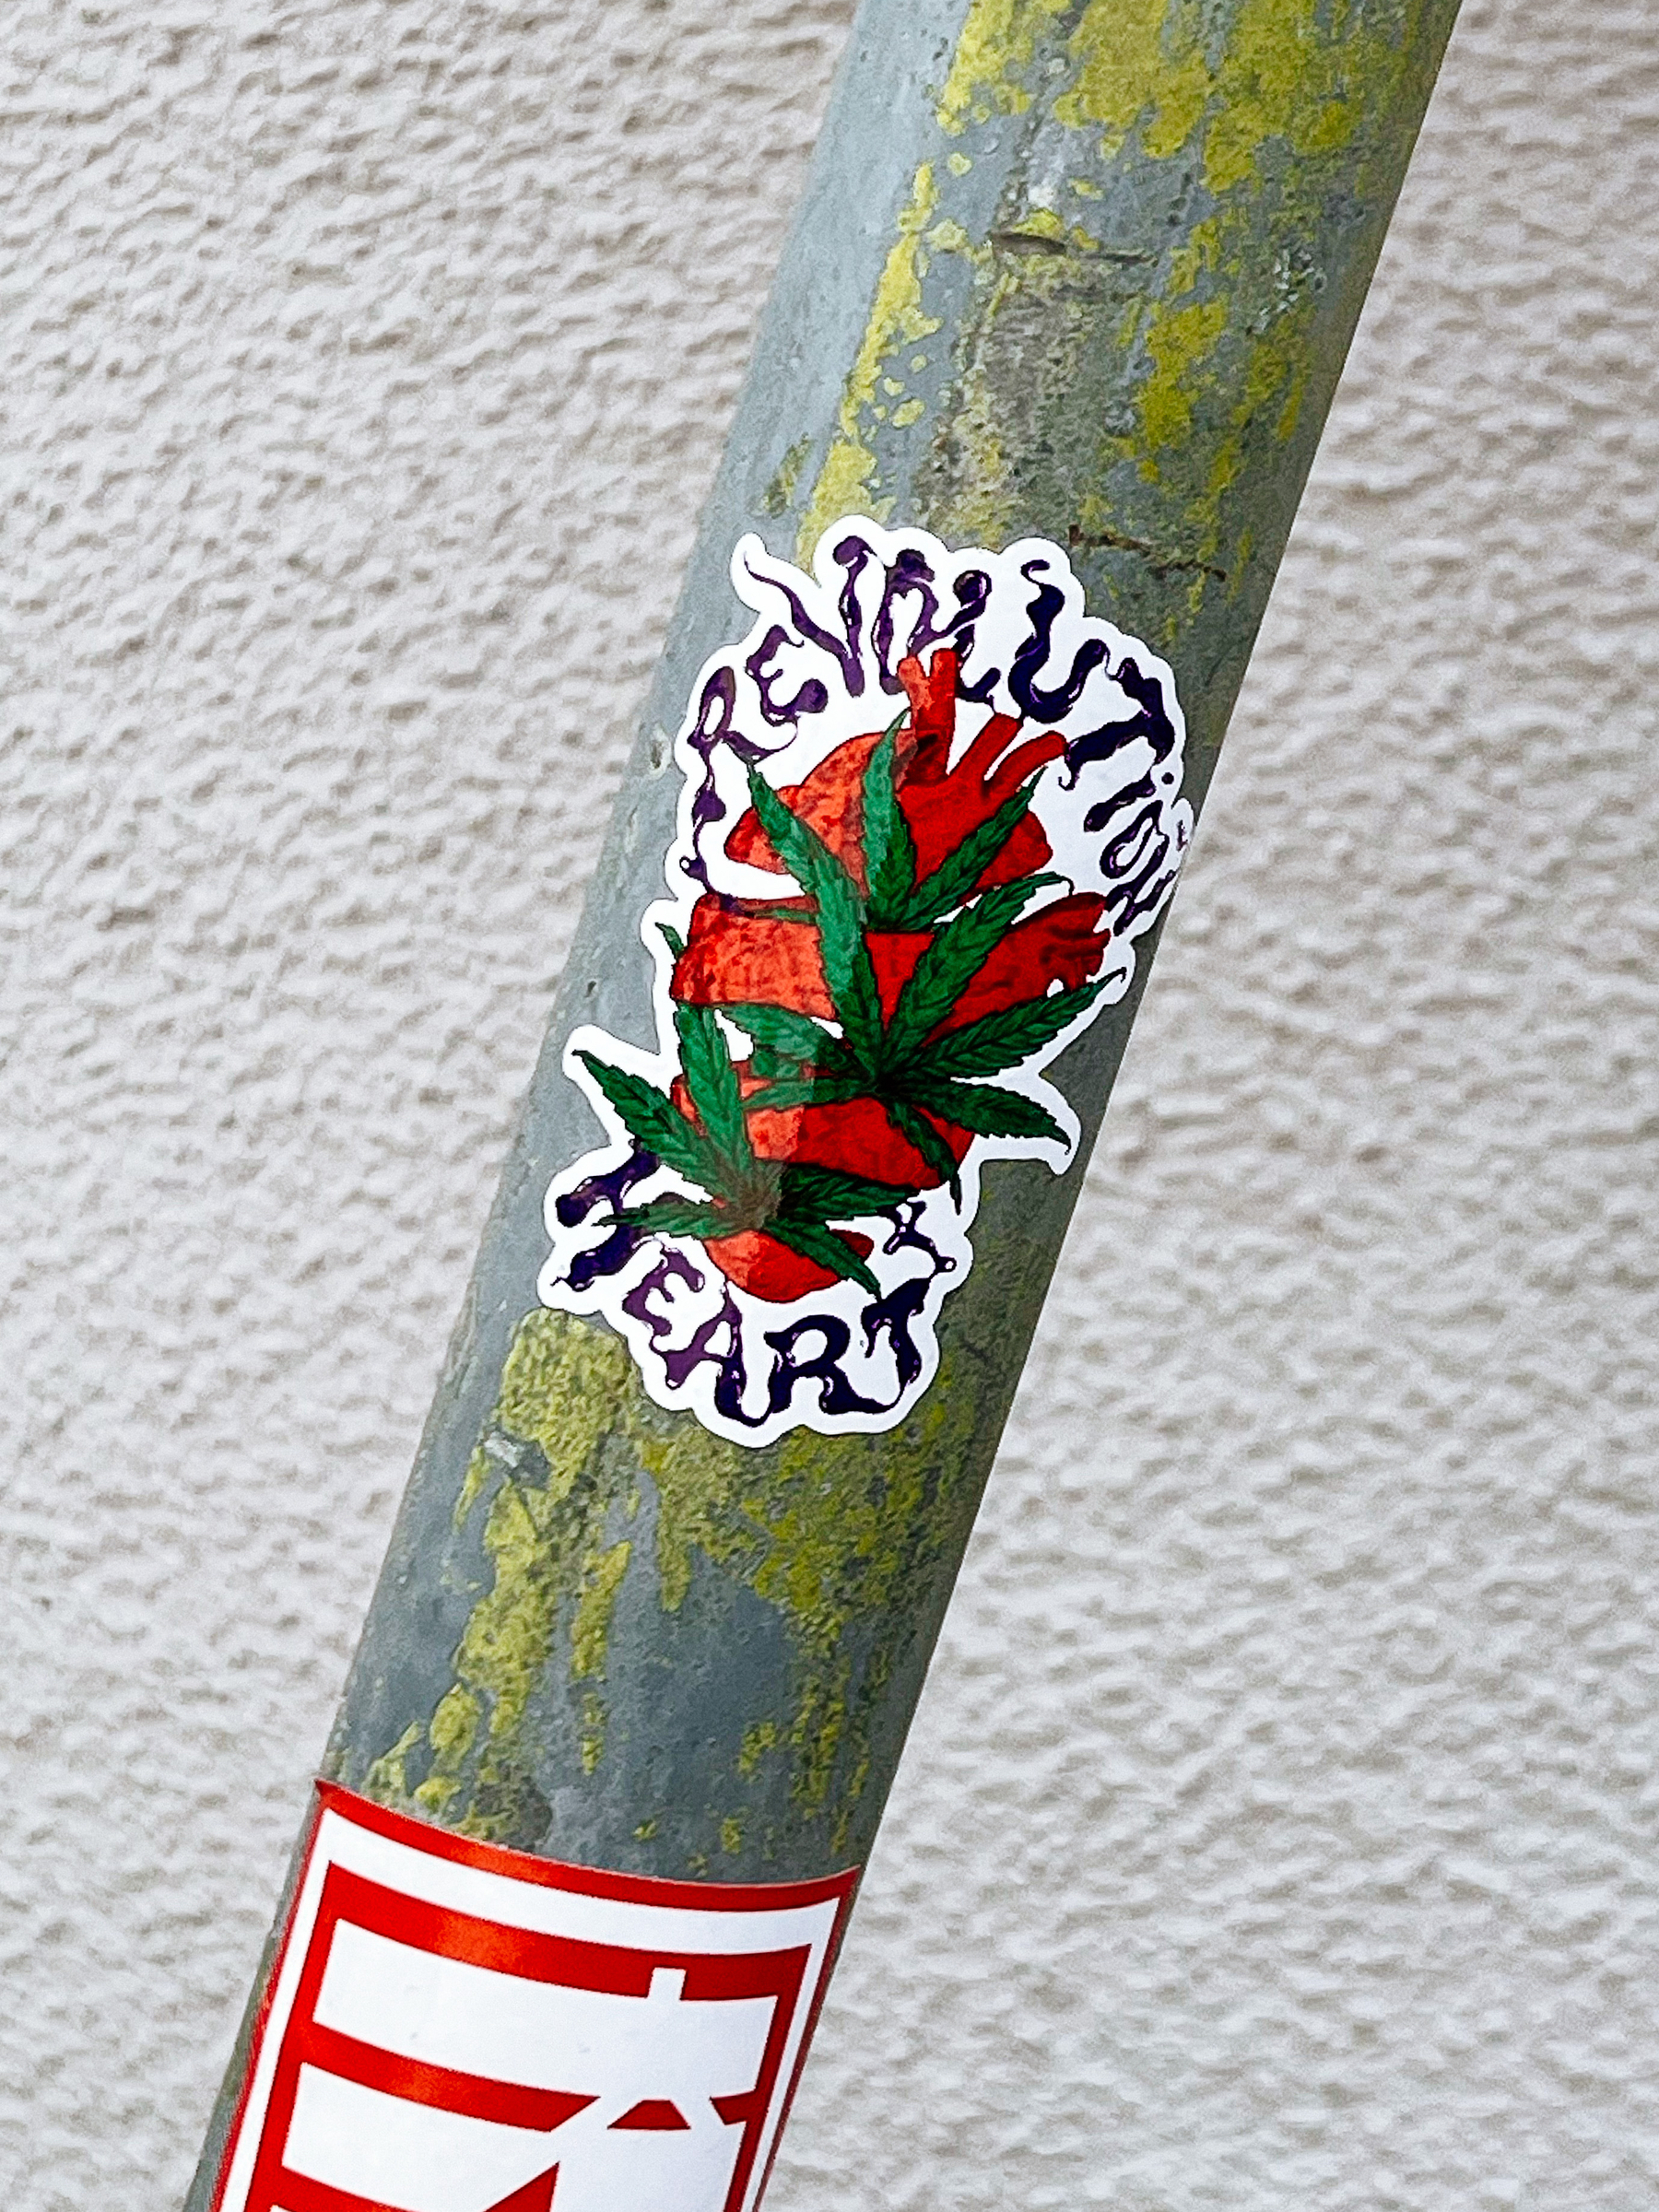 Sticker with the words “revolution heart”, and a drawing of a sliced heart with marijuana leaves. 